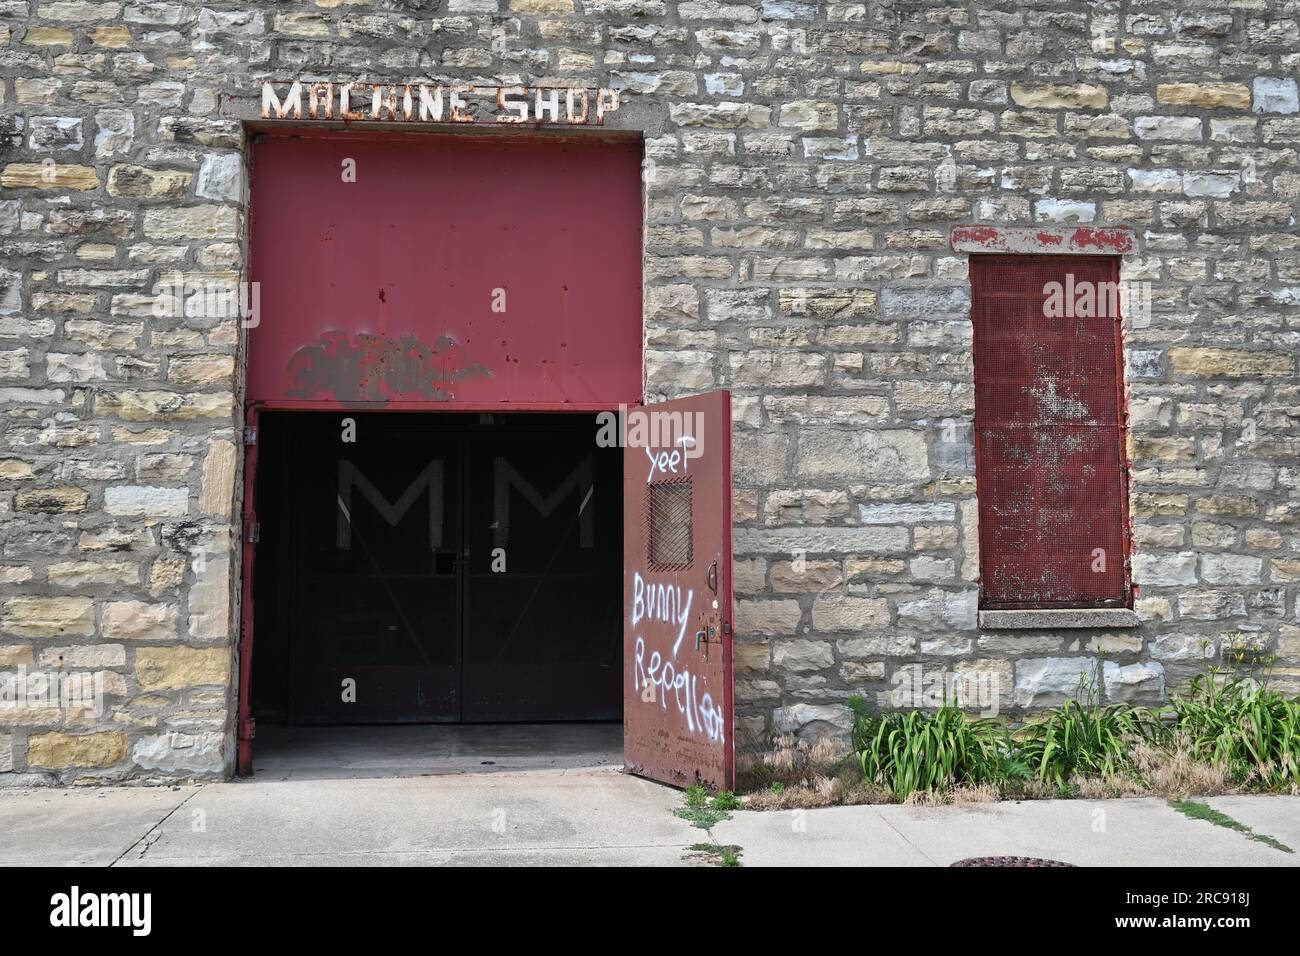 Doors to the machine shop at the Old Joliet Prison, which opened in 1858 and was closed and abandoned in 2002. Stock Photo